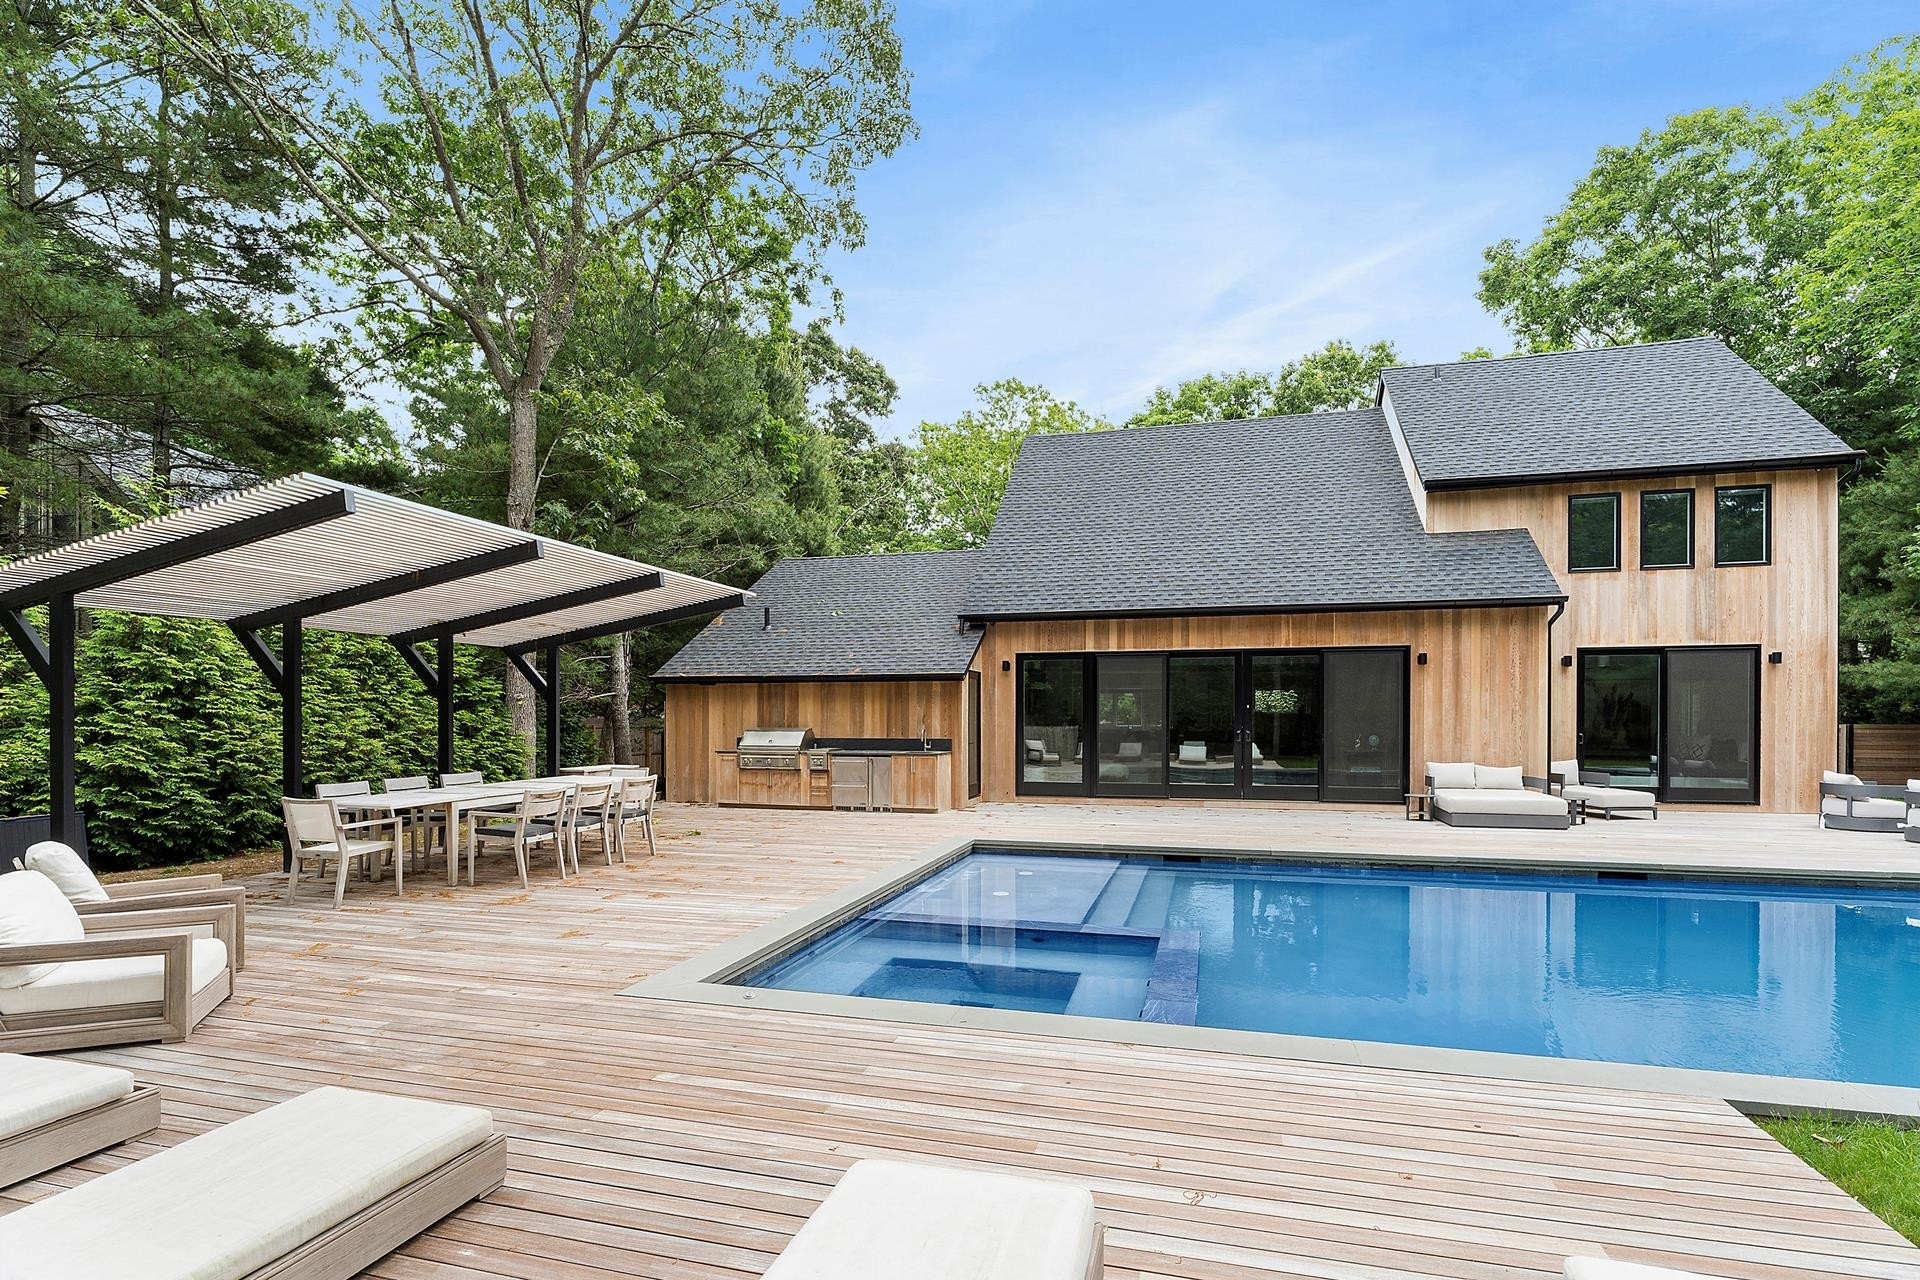 Single Family Home for Sale at Northwest Woods, East Hampton, New York 11937